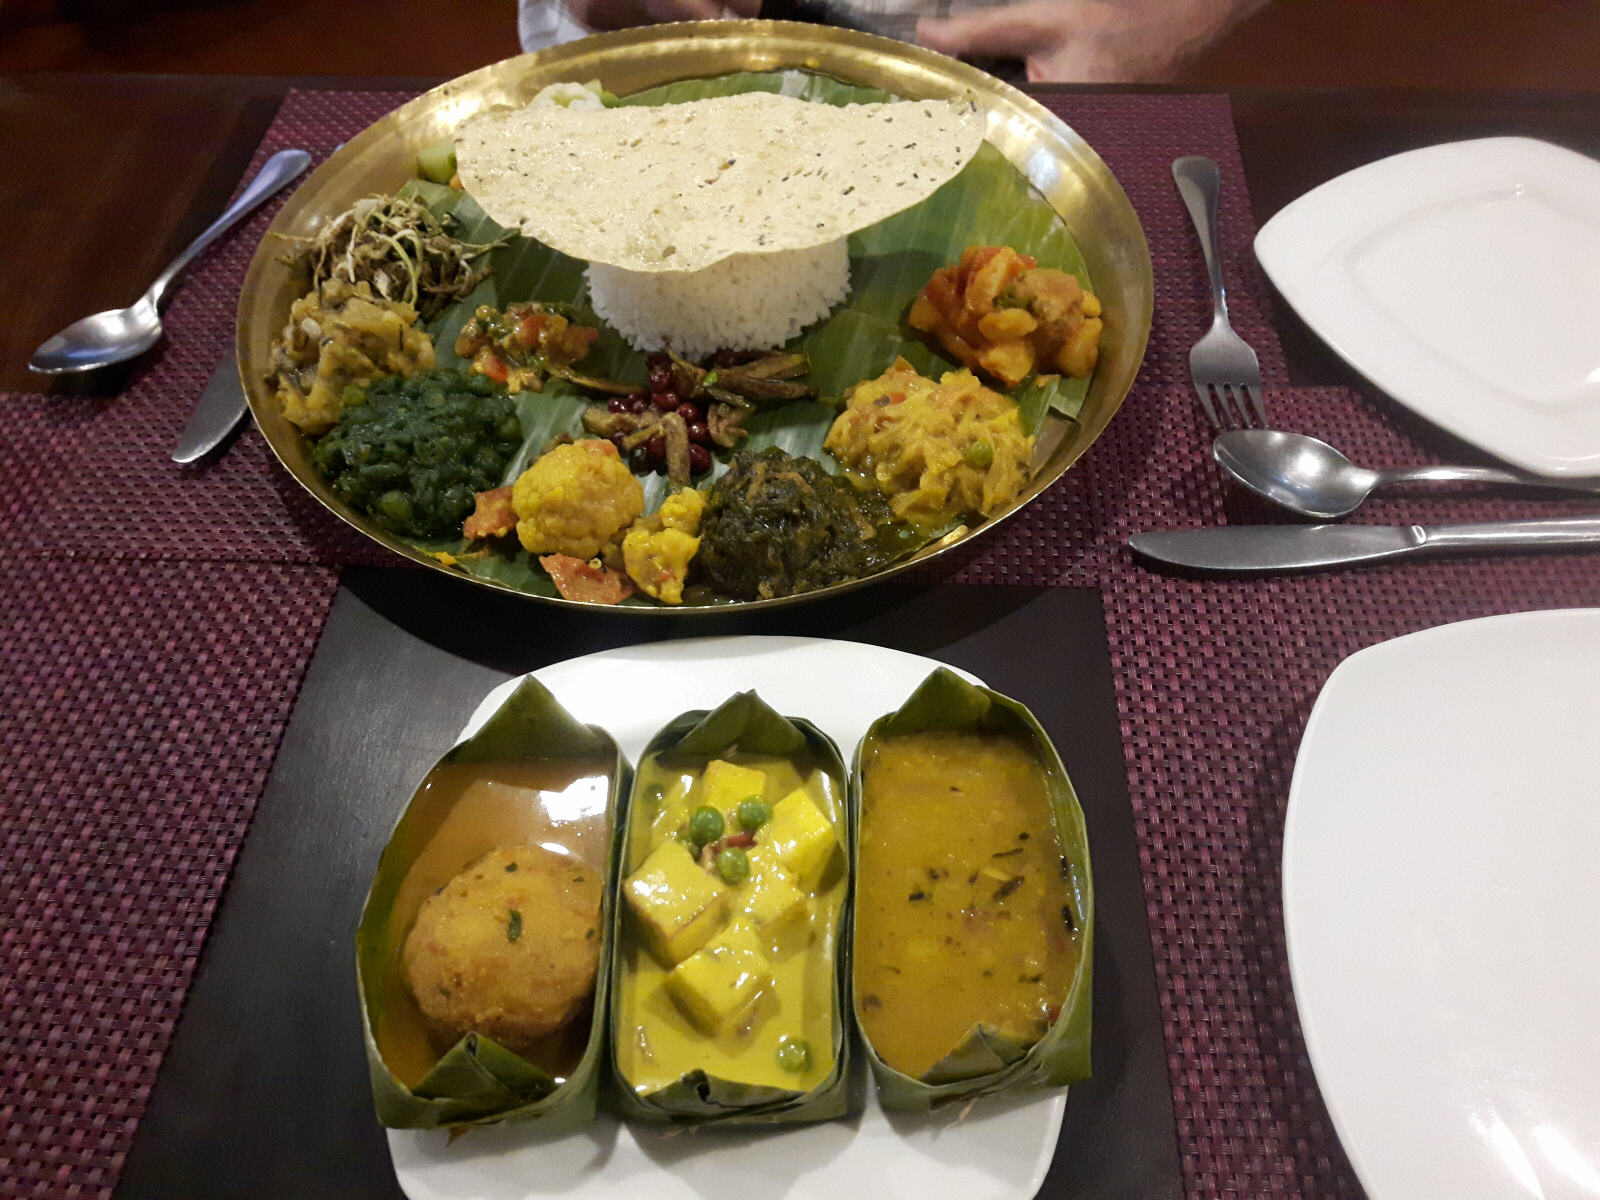 Special Thali dinner at the Classic hotel in Imphal, Manipur state